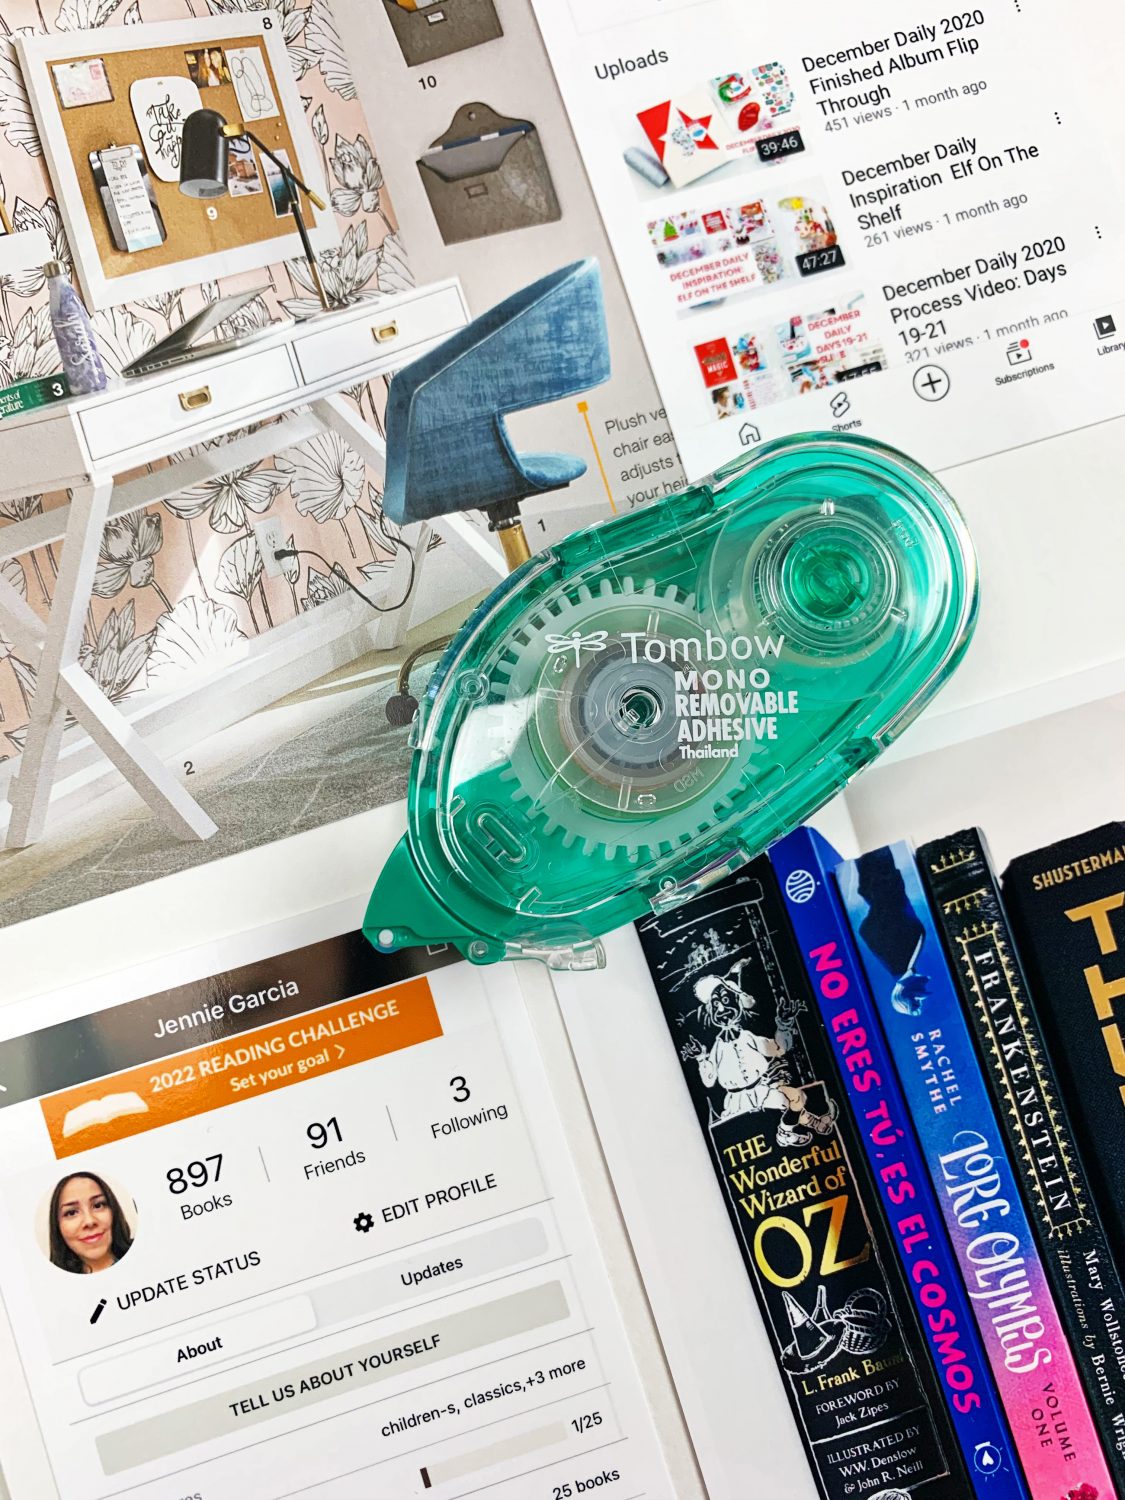 When you are making a vision board use the Tombow MONO Removable Adhesive to place your photos on the board. The adhesive let's you rearrange the photos until you are happy with the layout. #tombow #tombowusa #visionboard